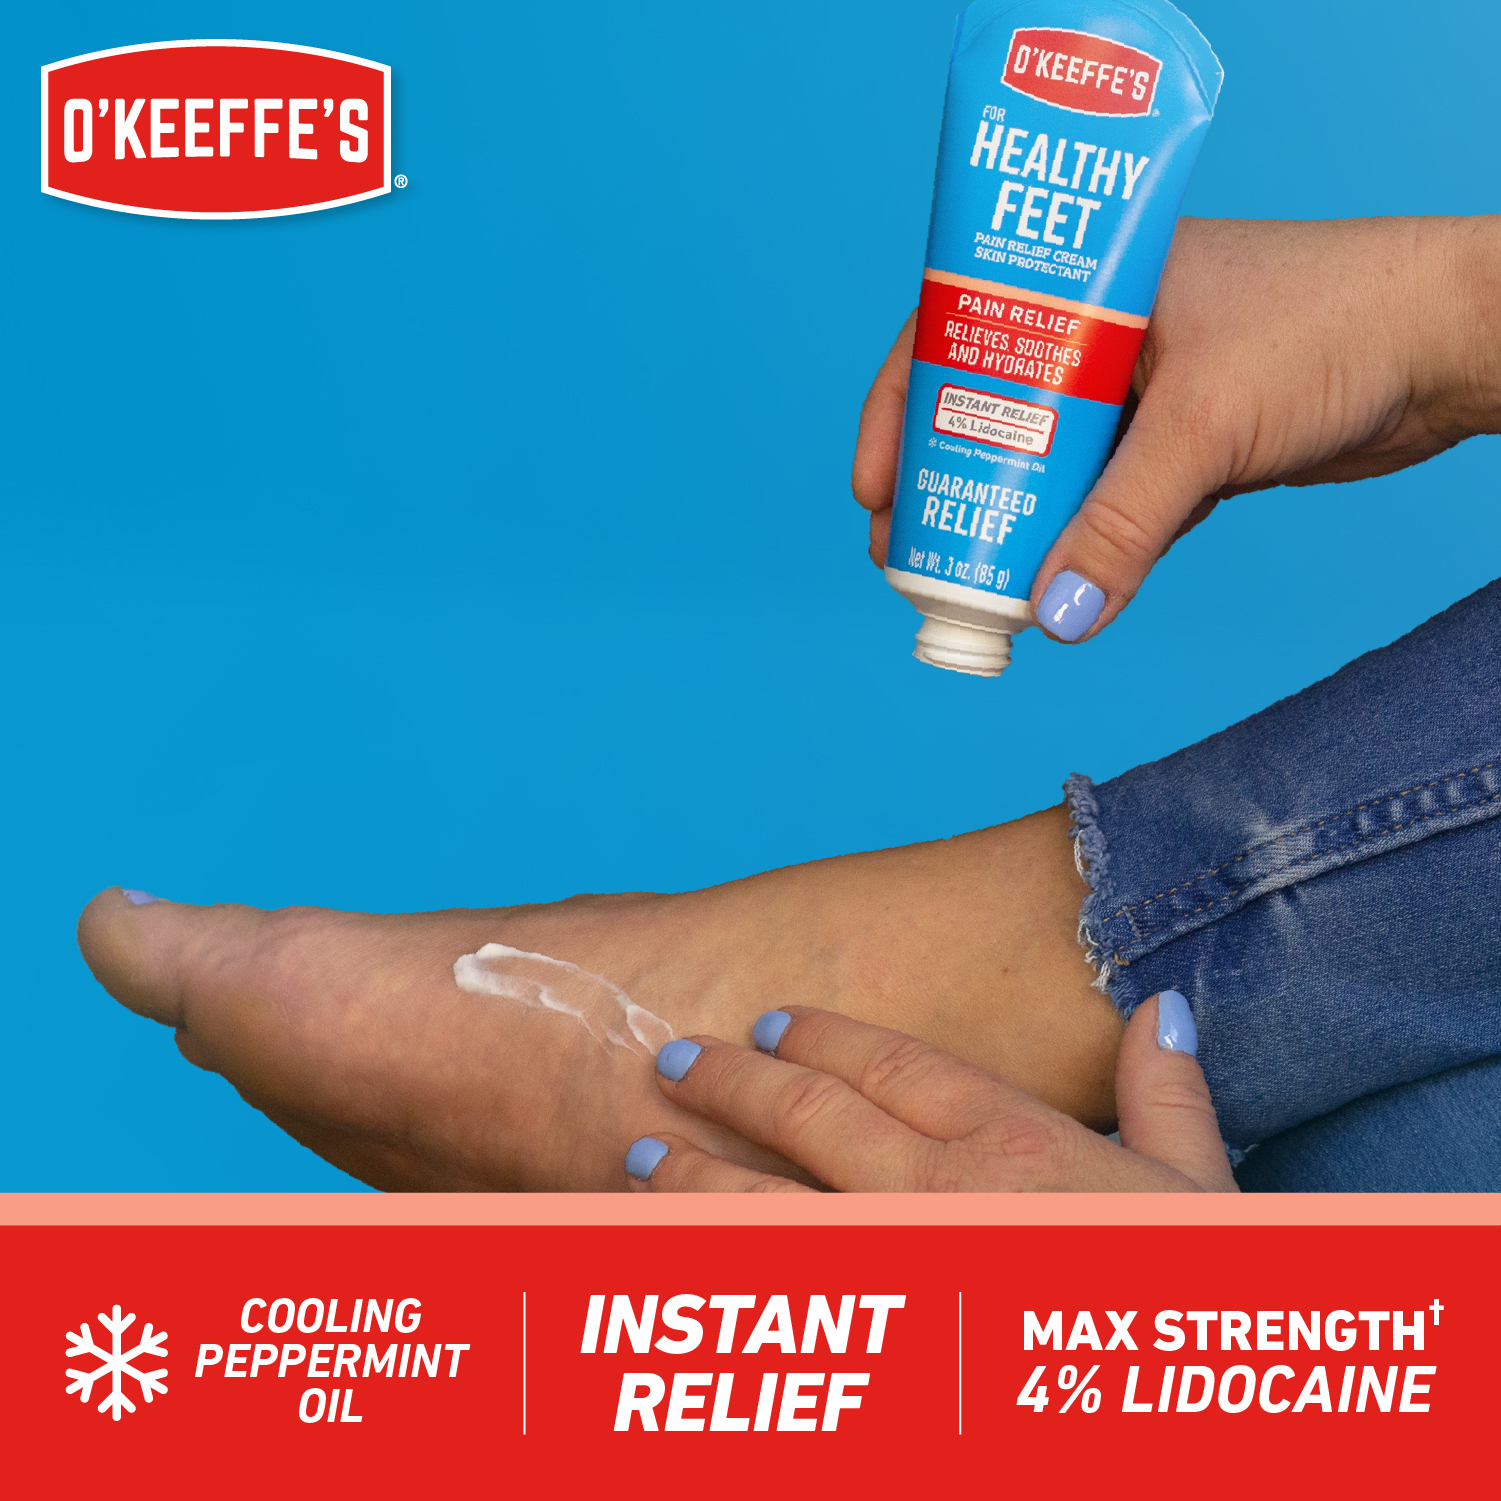 O'Keeffe's Healthy Feet Pain Relieving Foot Cream with Lidocaine Medicine,  3oz Tube